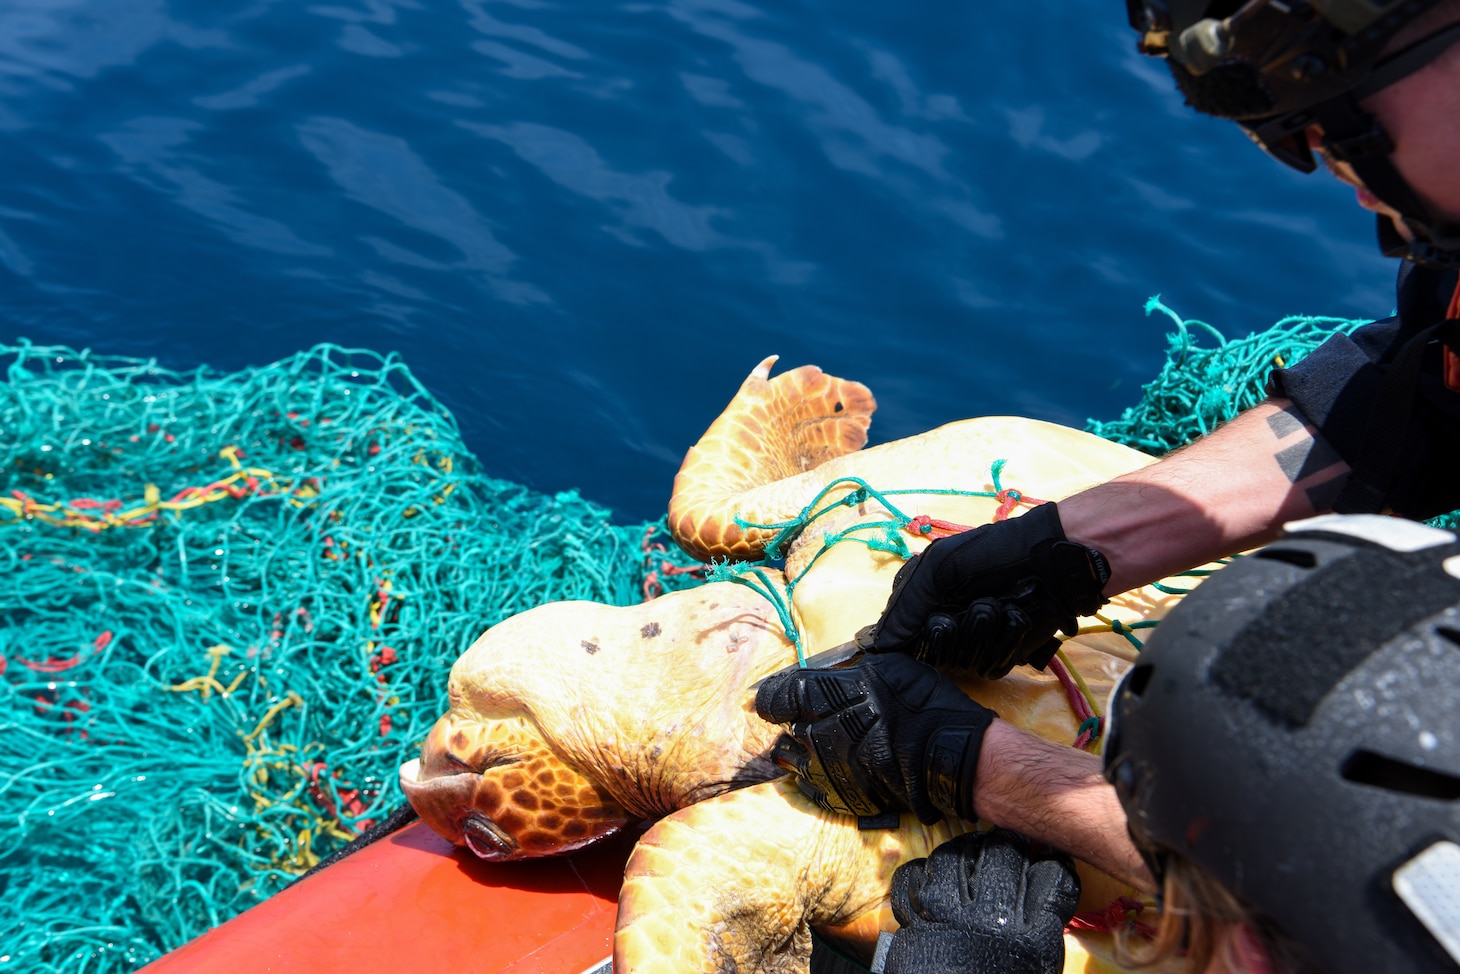 U.S. Coast Guard Petty Officer 3rd Class Dylan Neathery, assigned to the Famous-class medium endurance cutter USCGC Mohawk (WMEC 913), rescues a sea turtle caught in a fishing net in the Atlantic Ocean, July 14, 2022. USCGC Mohawk is on a scheduled deployment in the U.S. Naval Forces Africa area of operations, employed by U.S. Sixth Fleet to defend U.S., allied, and partner interests. (U.S. Coast Guard photo by Petty Officer 3rd Class Jessica Fontenette)